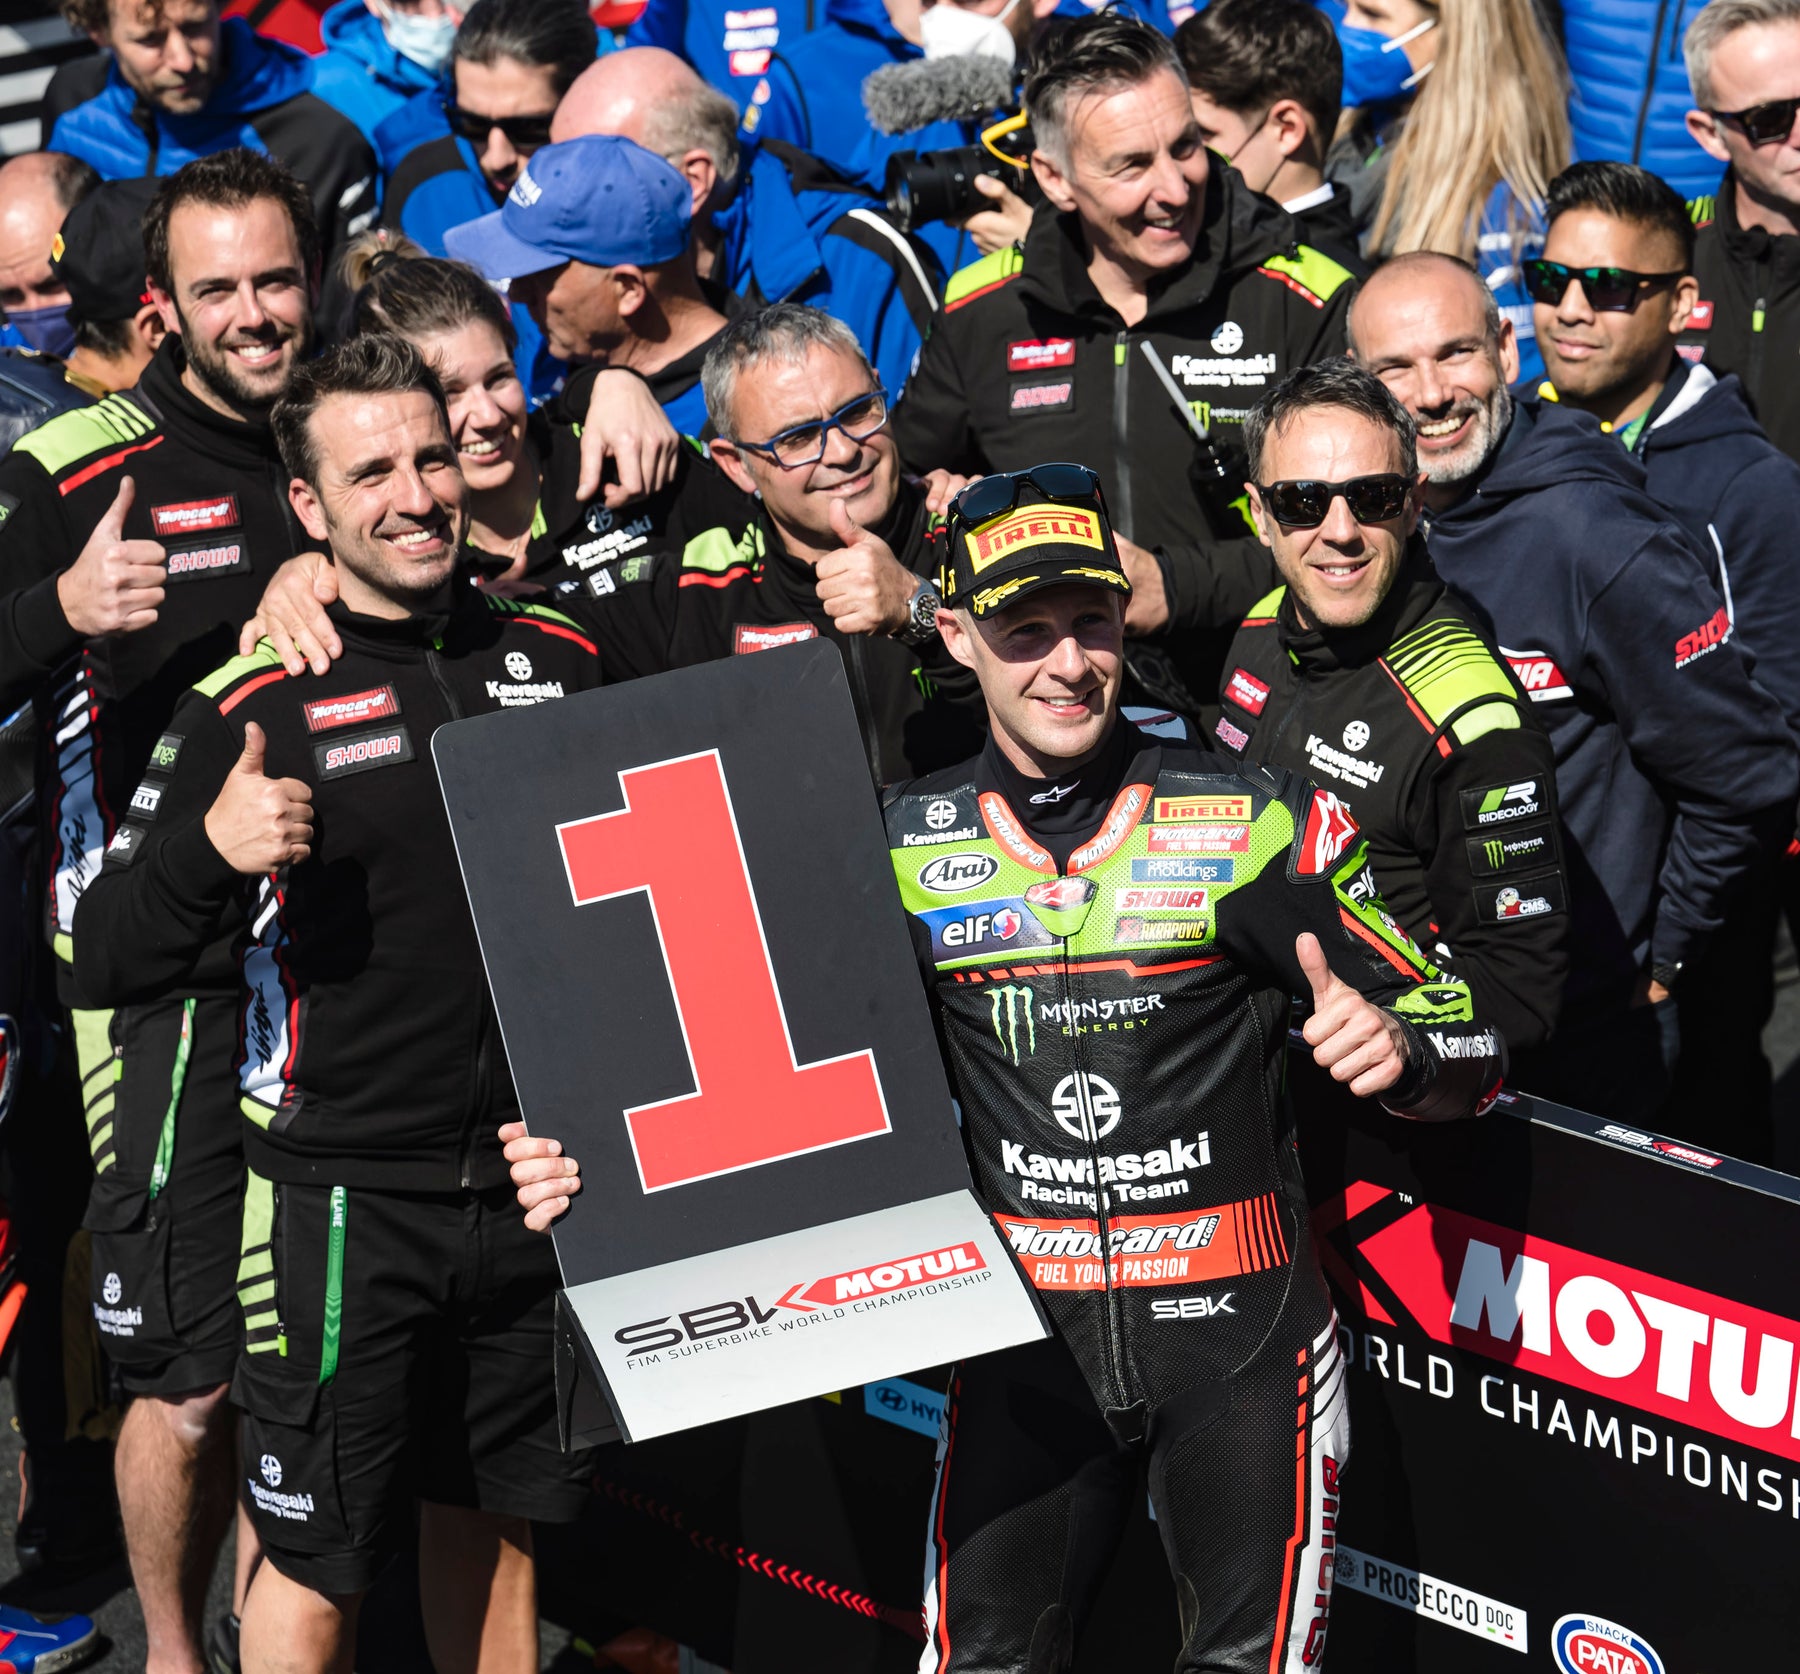 JONATHAN REA REACHES NEW MILESTONE AS HE TAKES TWO WORLD SUPERBIKE RACE VICTORIES IN ASSEN, NETHERLANDS